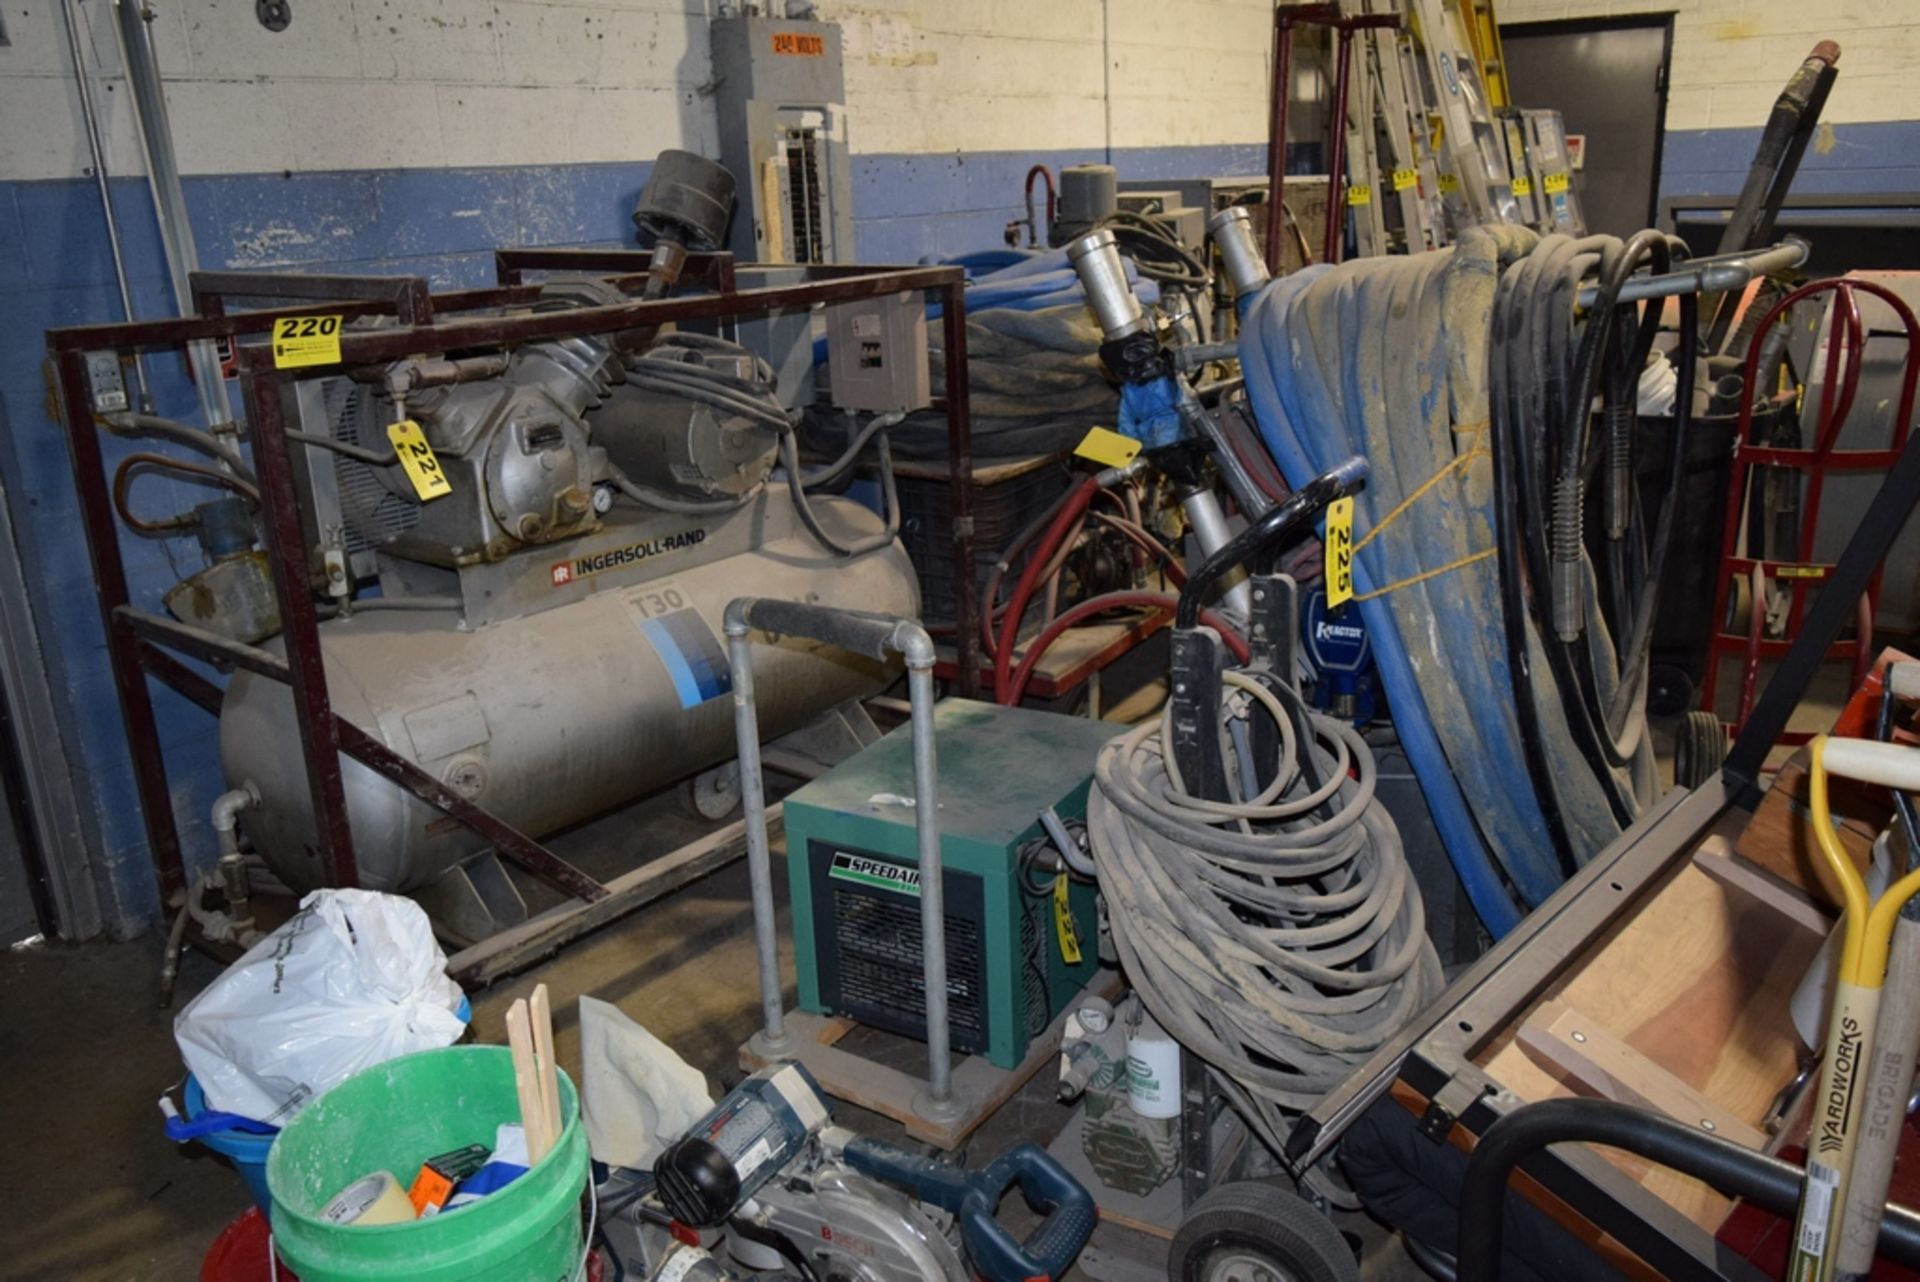 BULK BID OFFERING FOR LOTS 221 - 225, AN ENTIRE INSULATION BLOWING SYSTEM